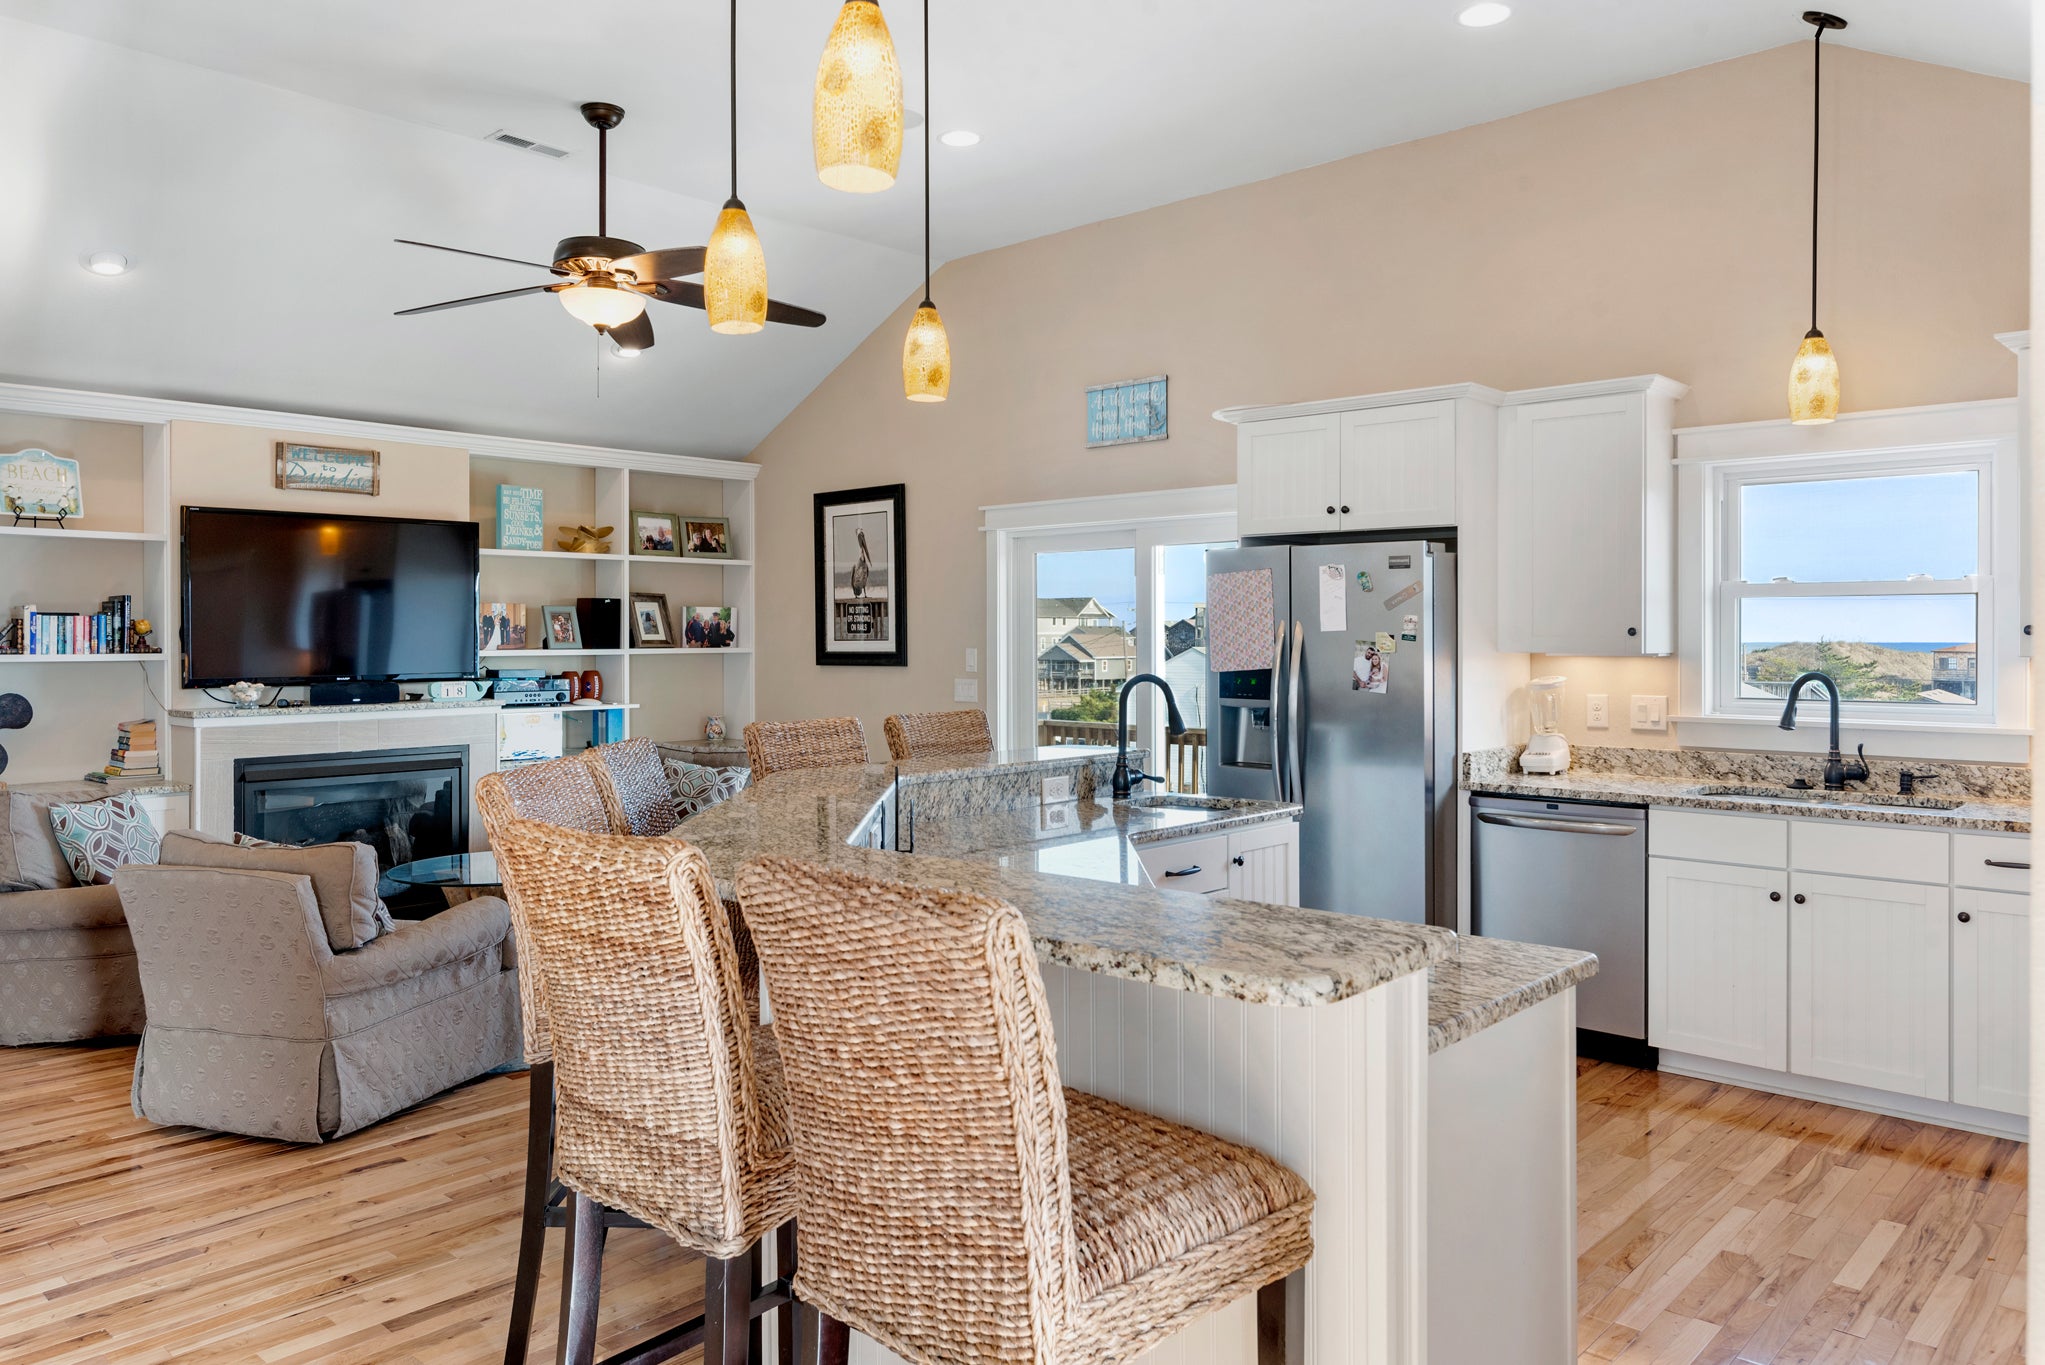 KDS3633: Another Day In Paradise | Top Level Living Area and Kitchen